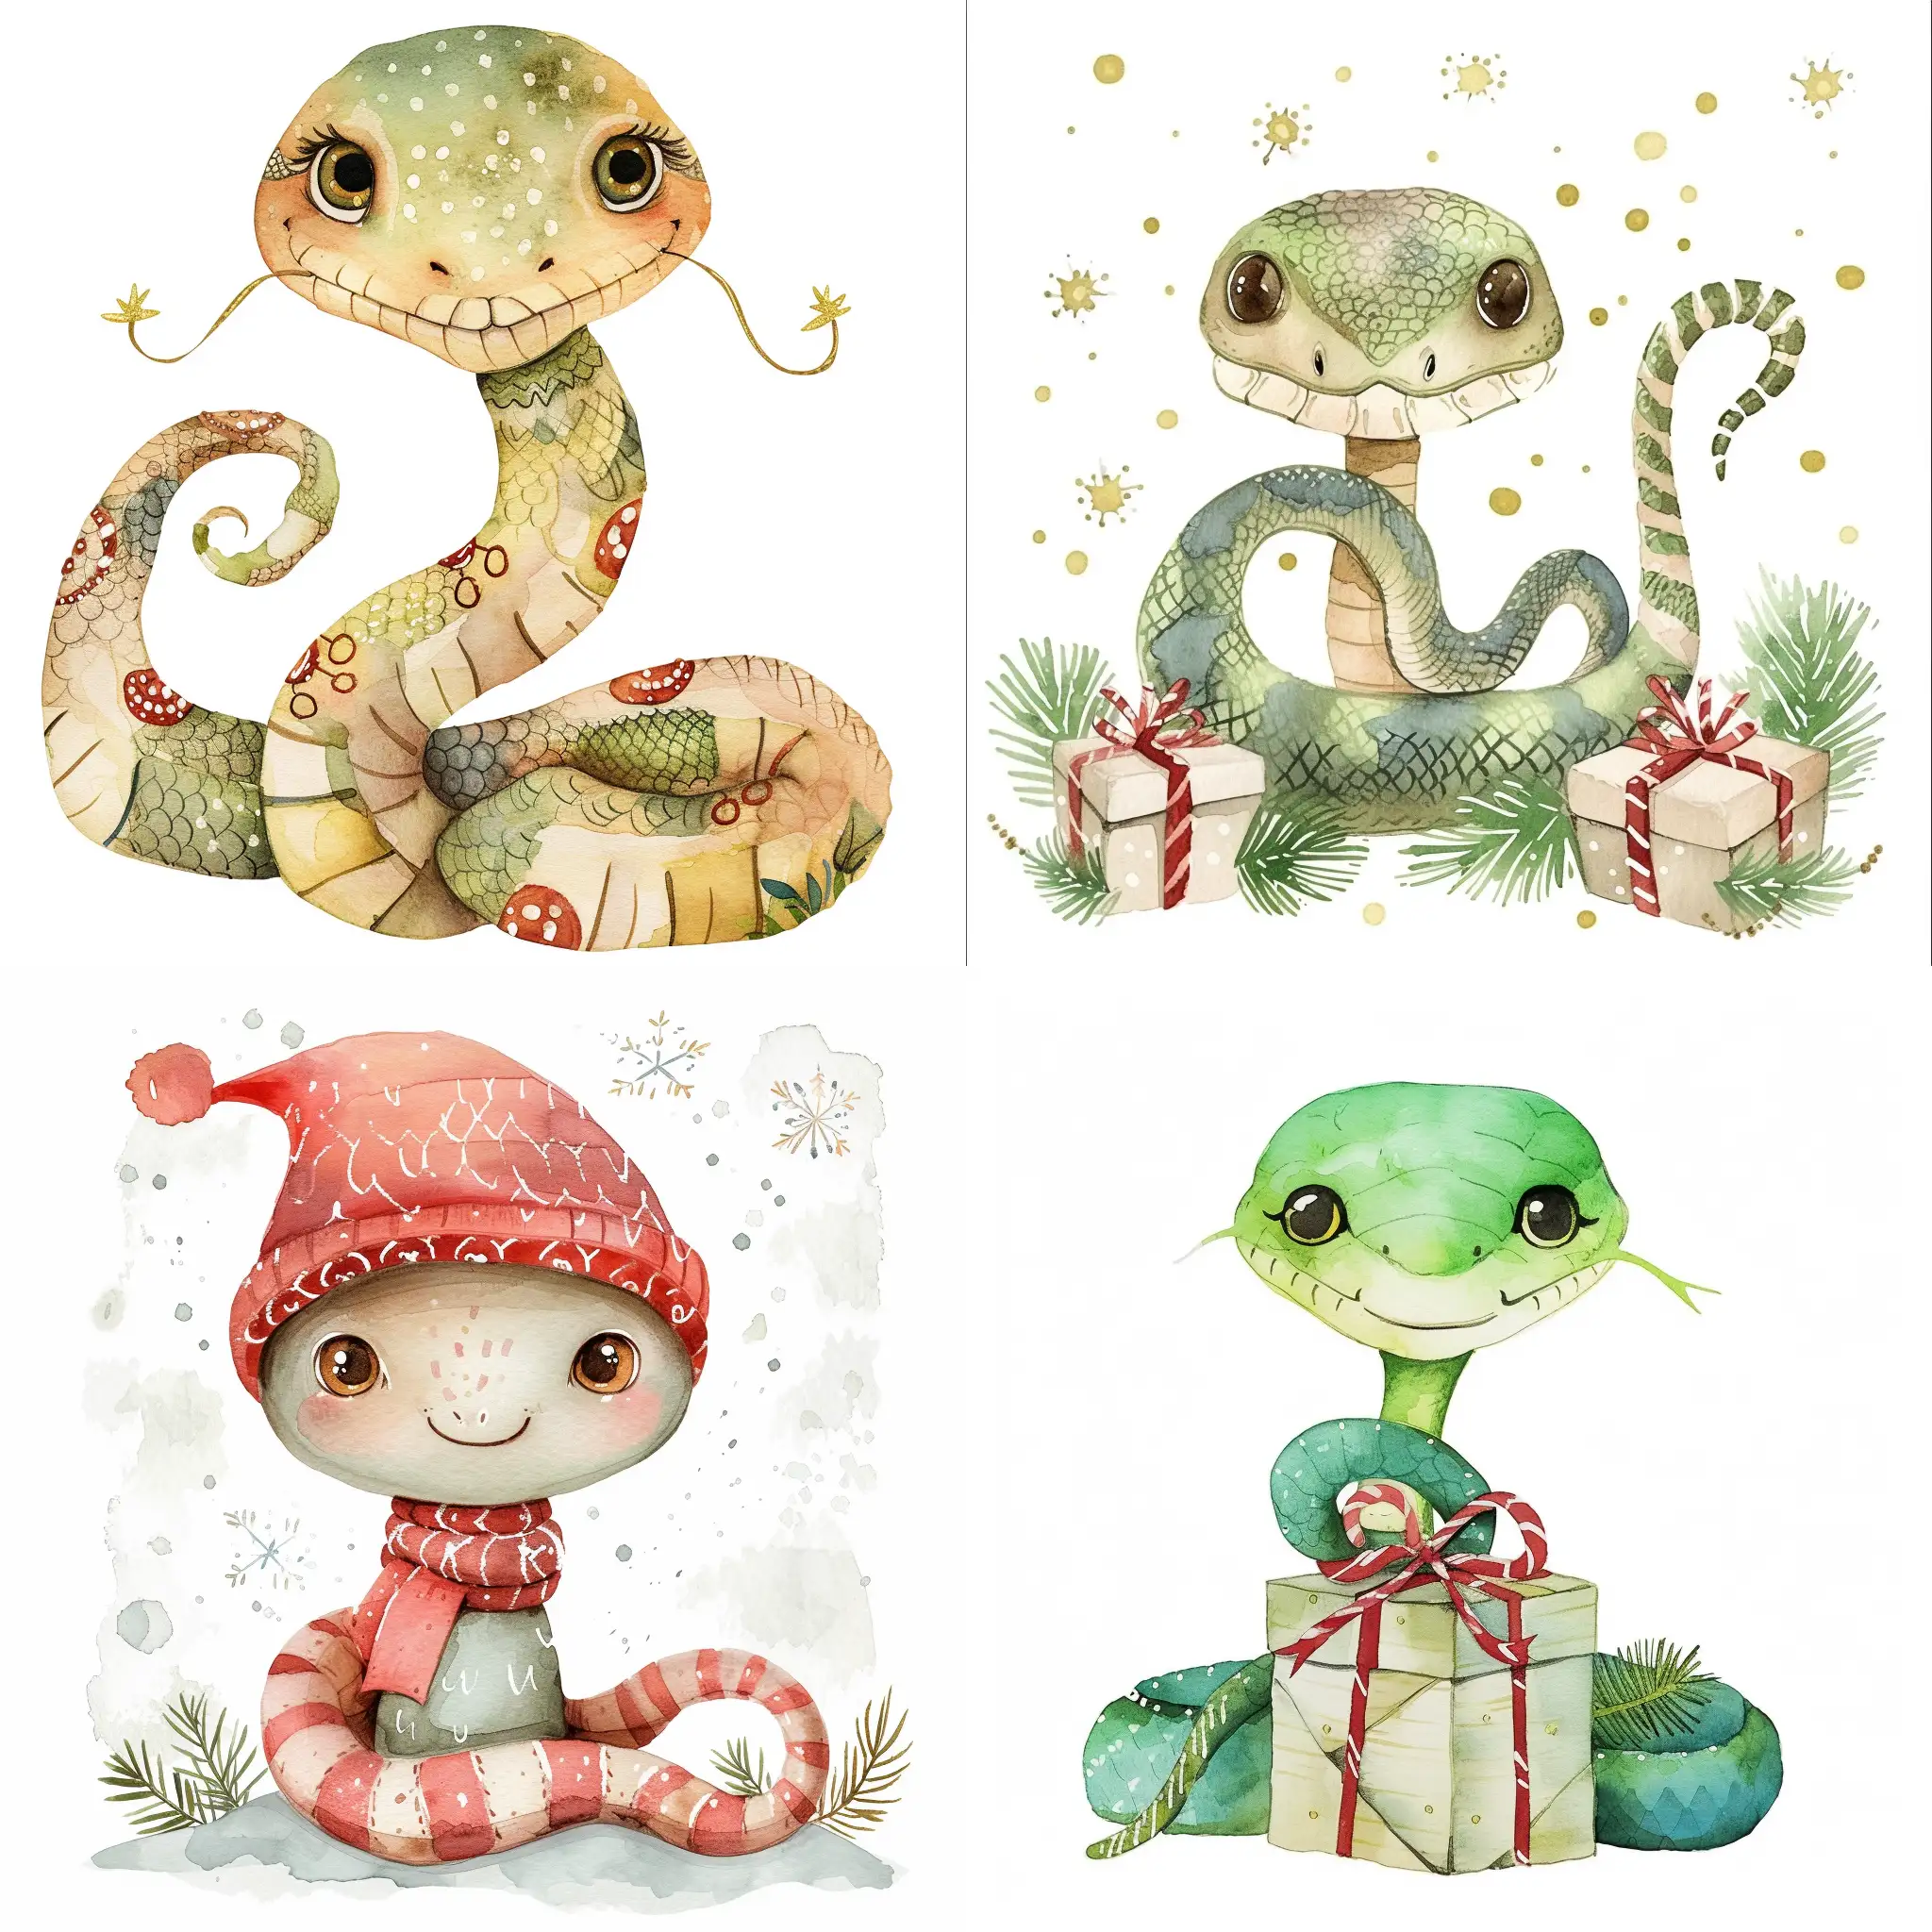 Adorable-New-Year-and-Christmas-Watercolor-Illustration-of-a-Little-Snake-on-White-Background